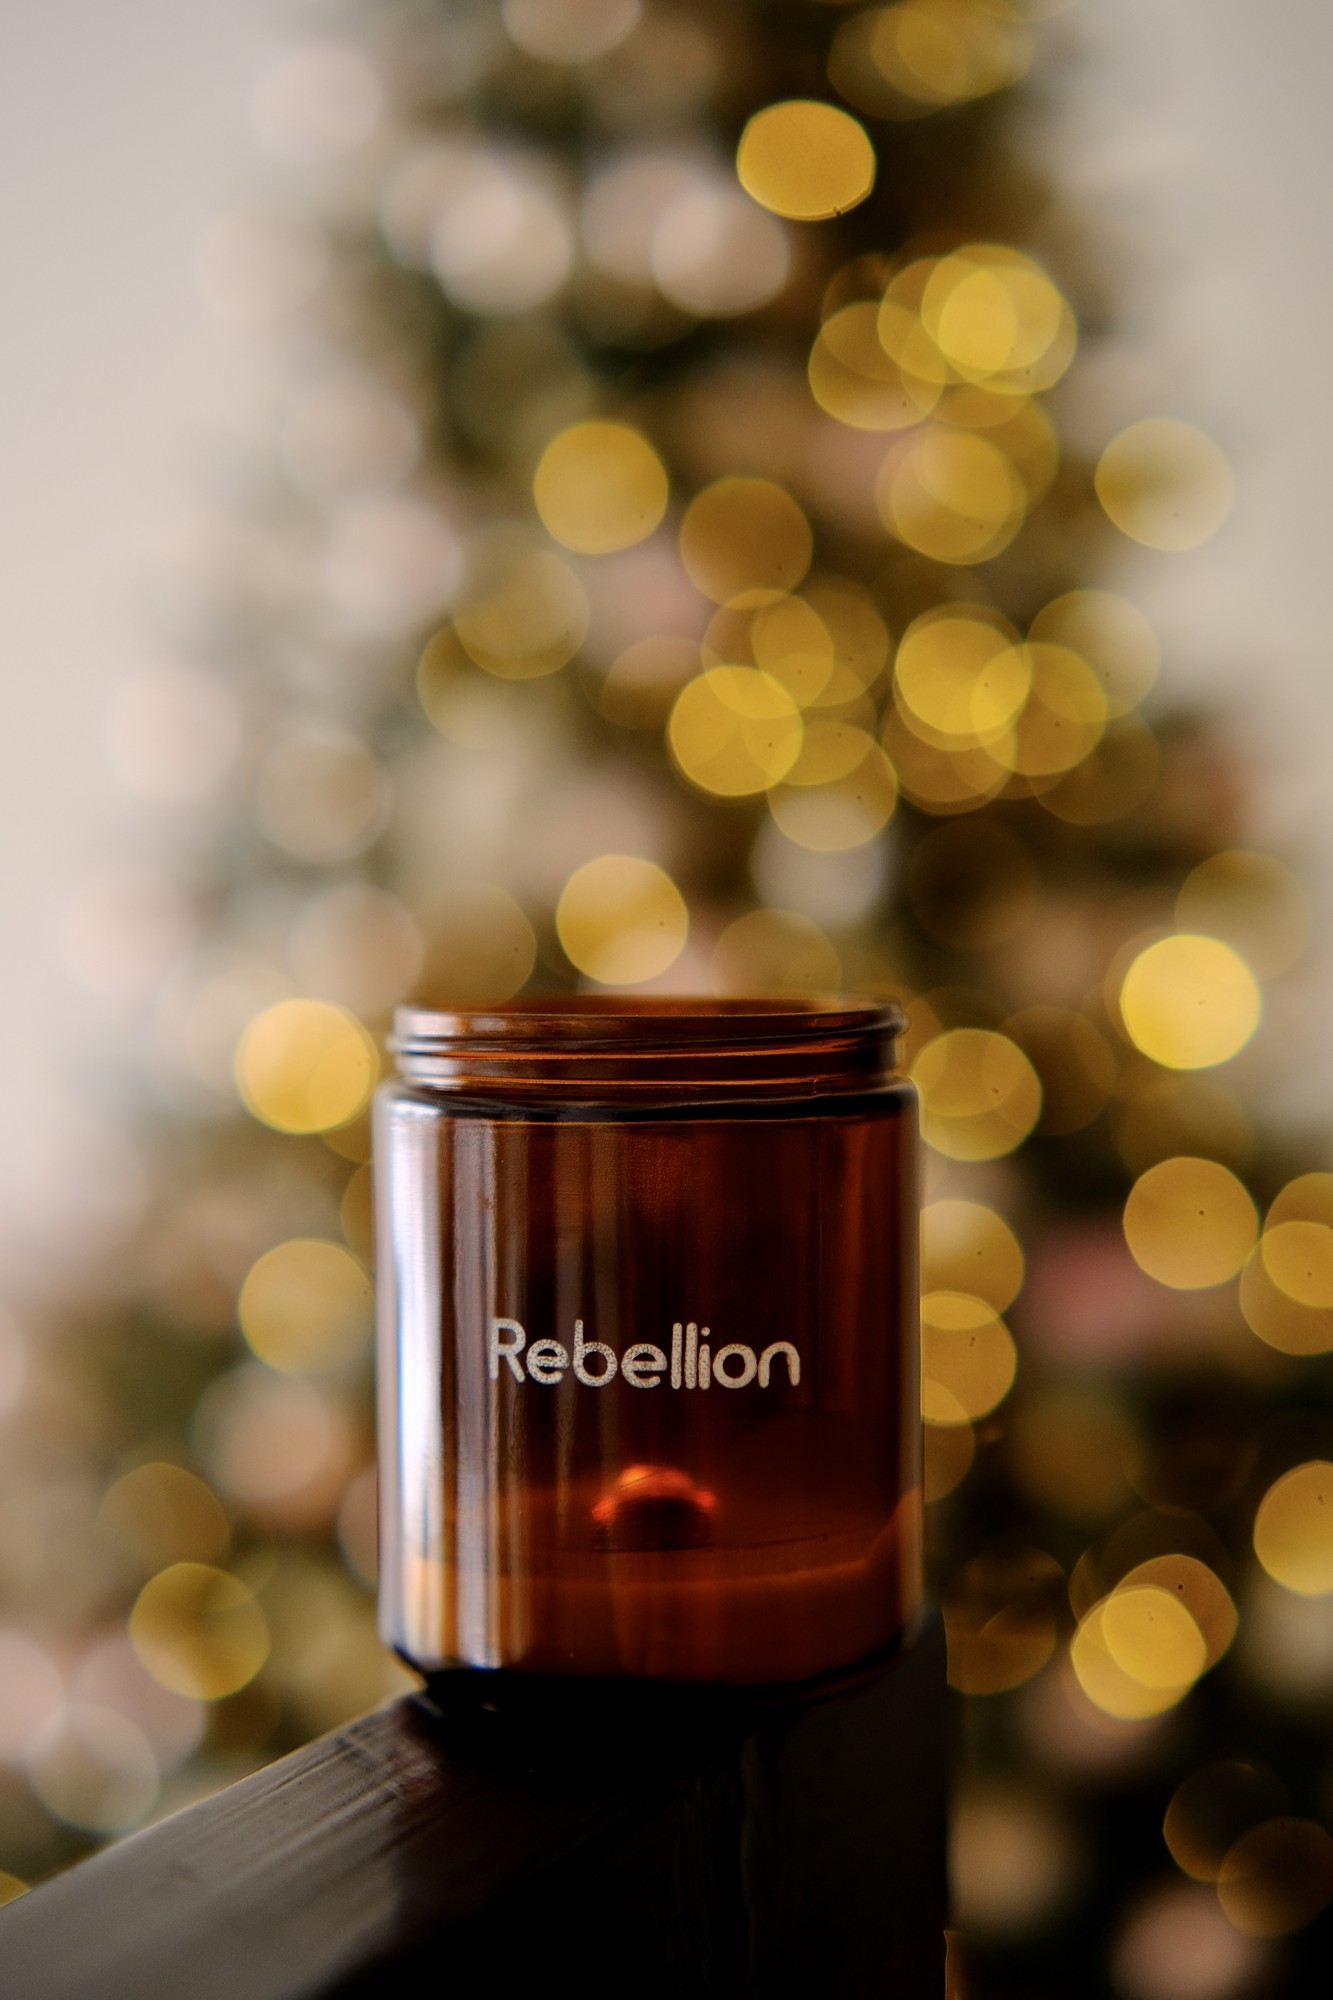 Rebellion Scent of Light Scented Candle